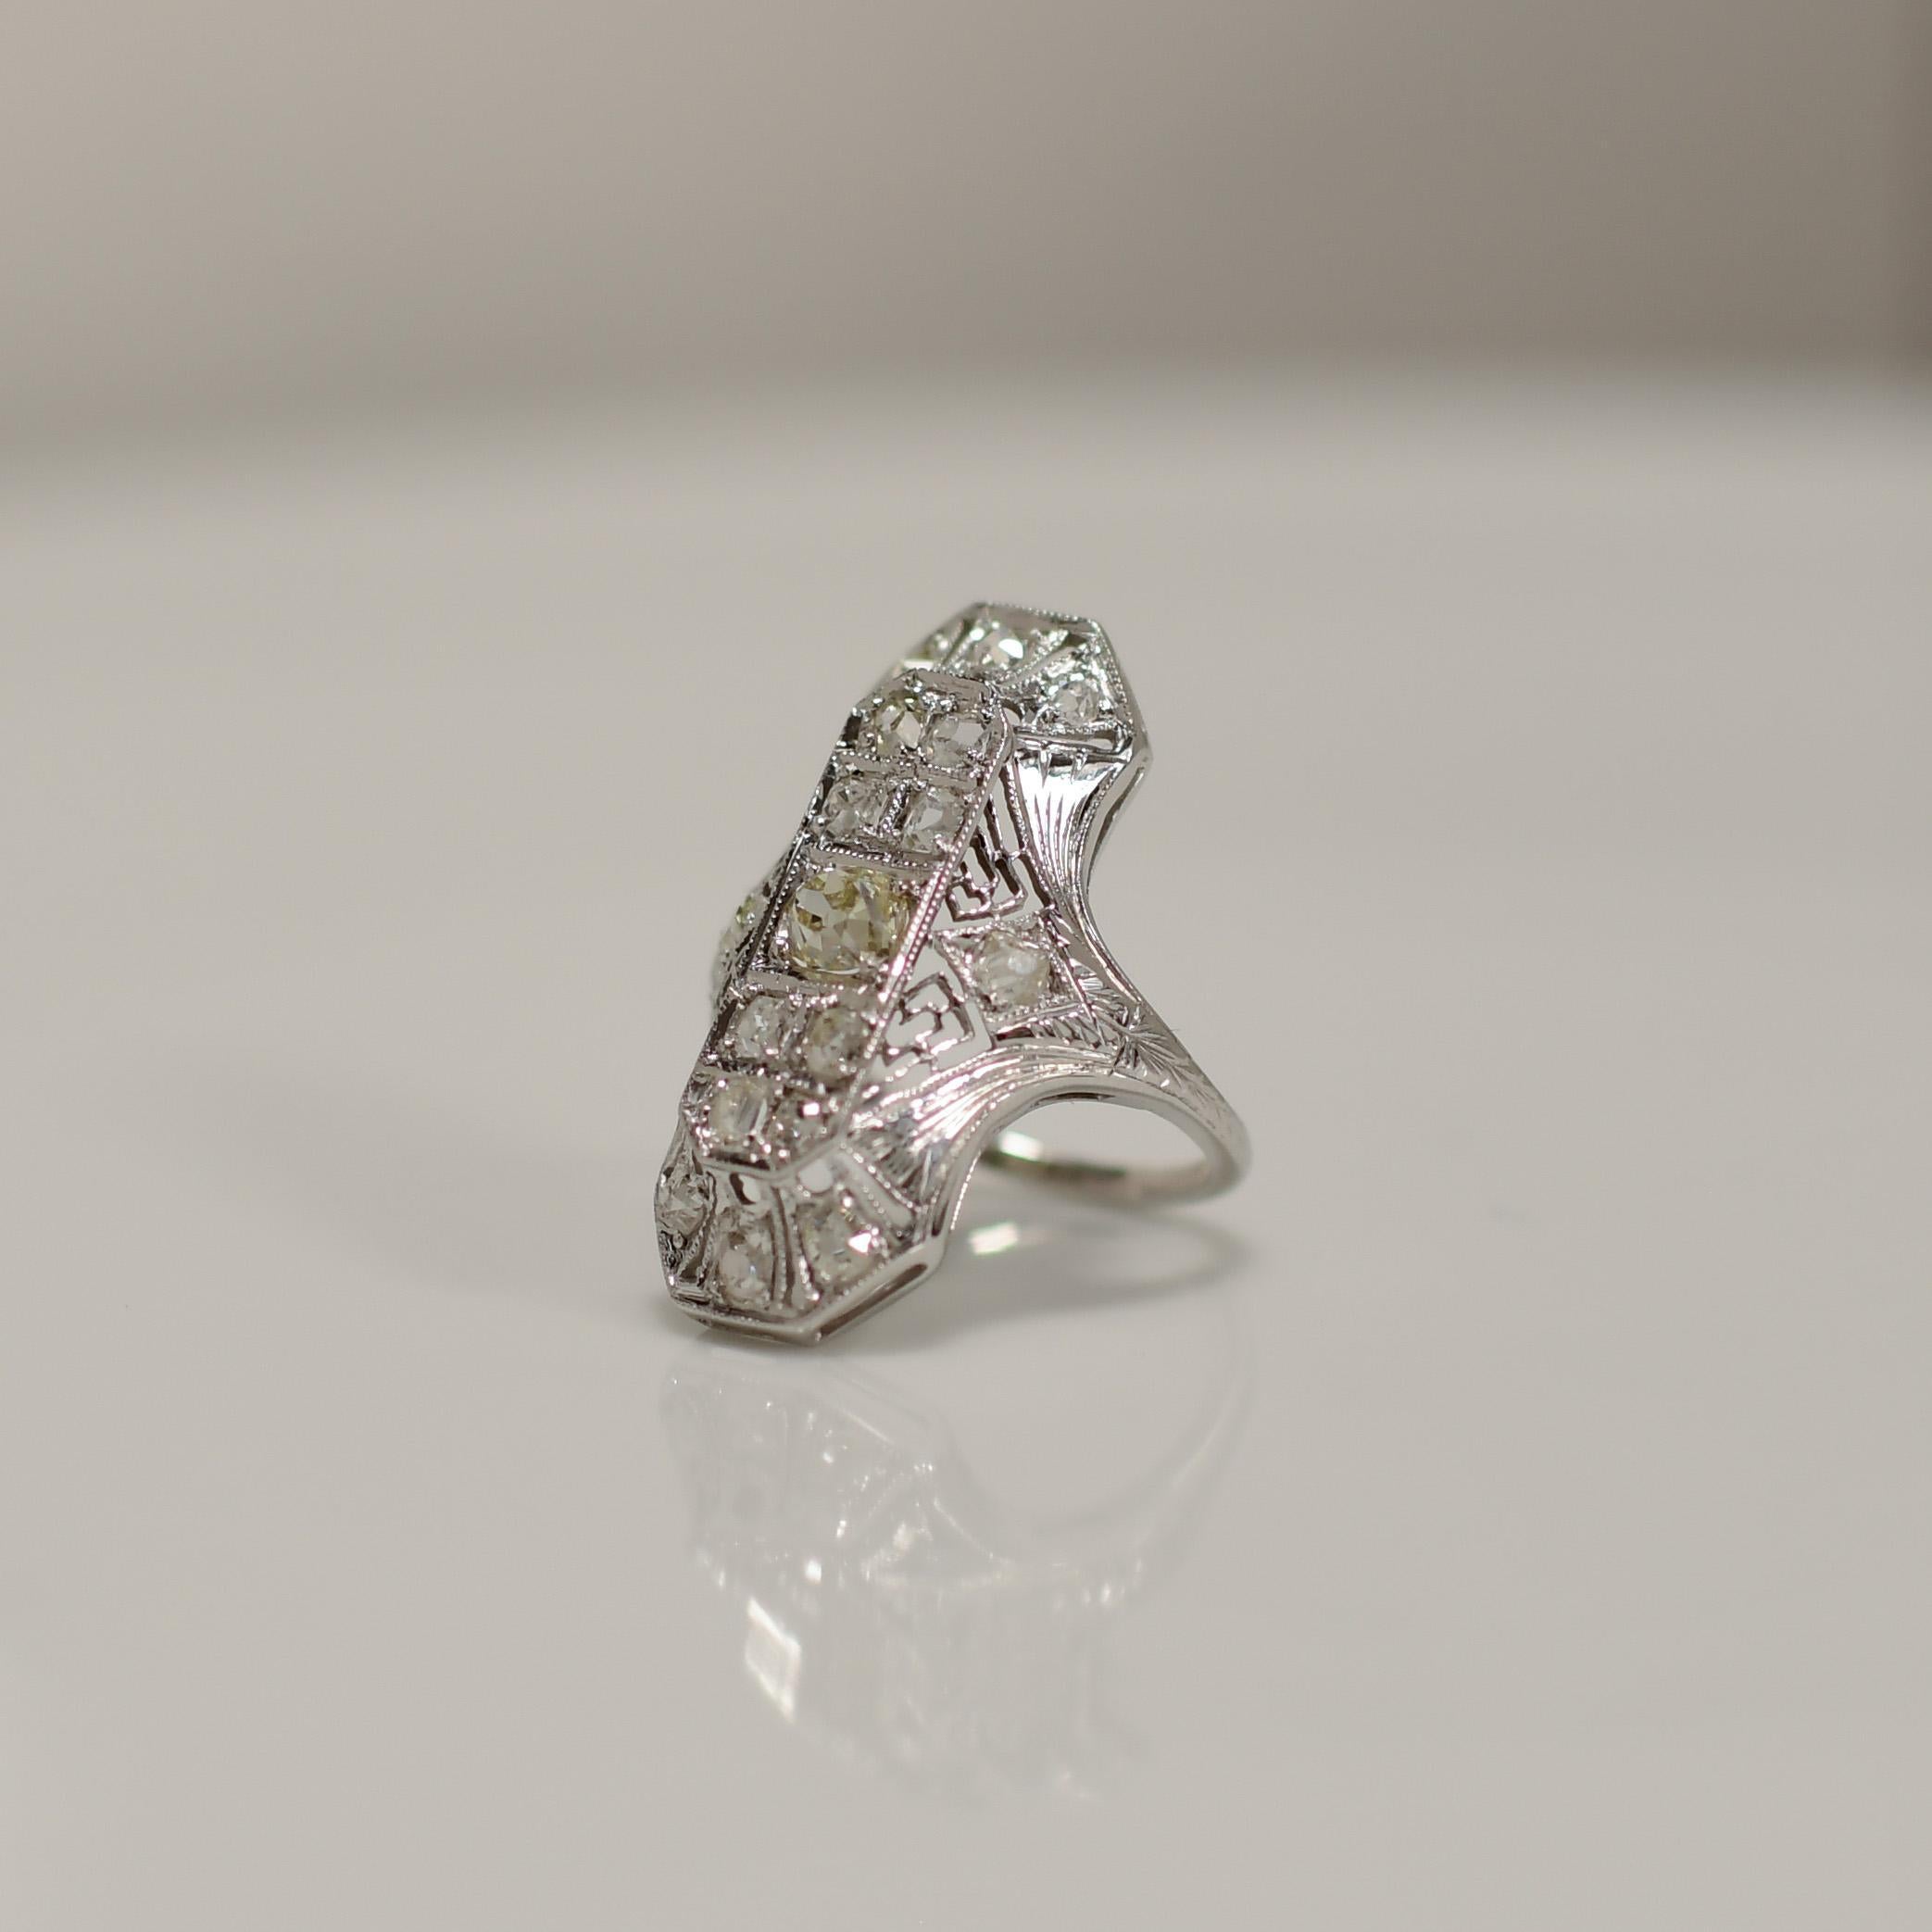 Filigree Art Deco Fancy Light Yellow Diamond 18K White Gold Shield Ring In Good Condition For Sale In Addison, TX